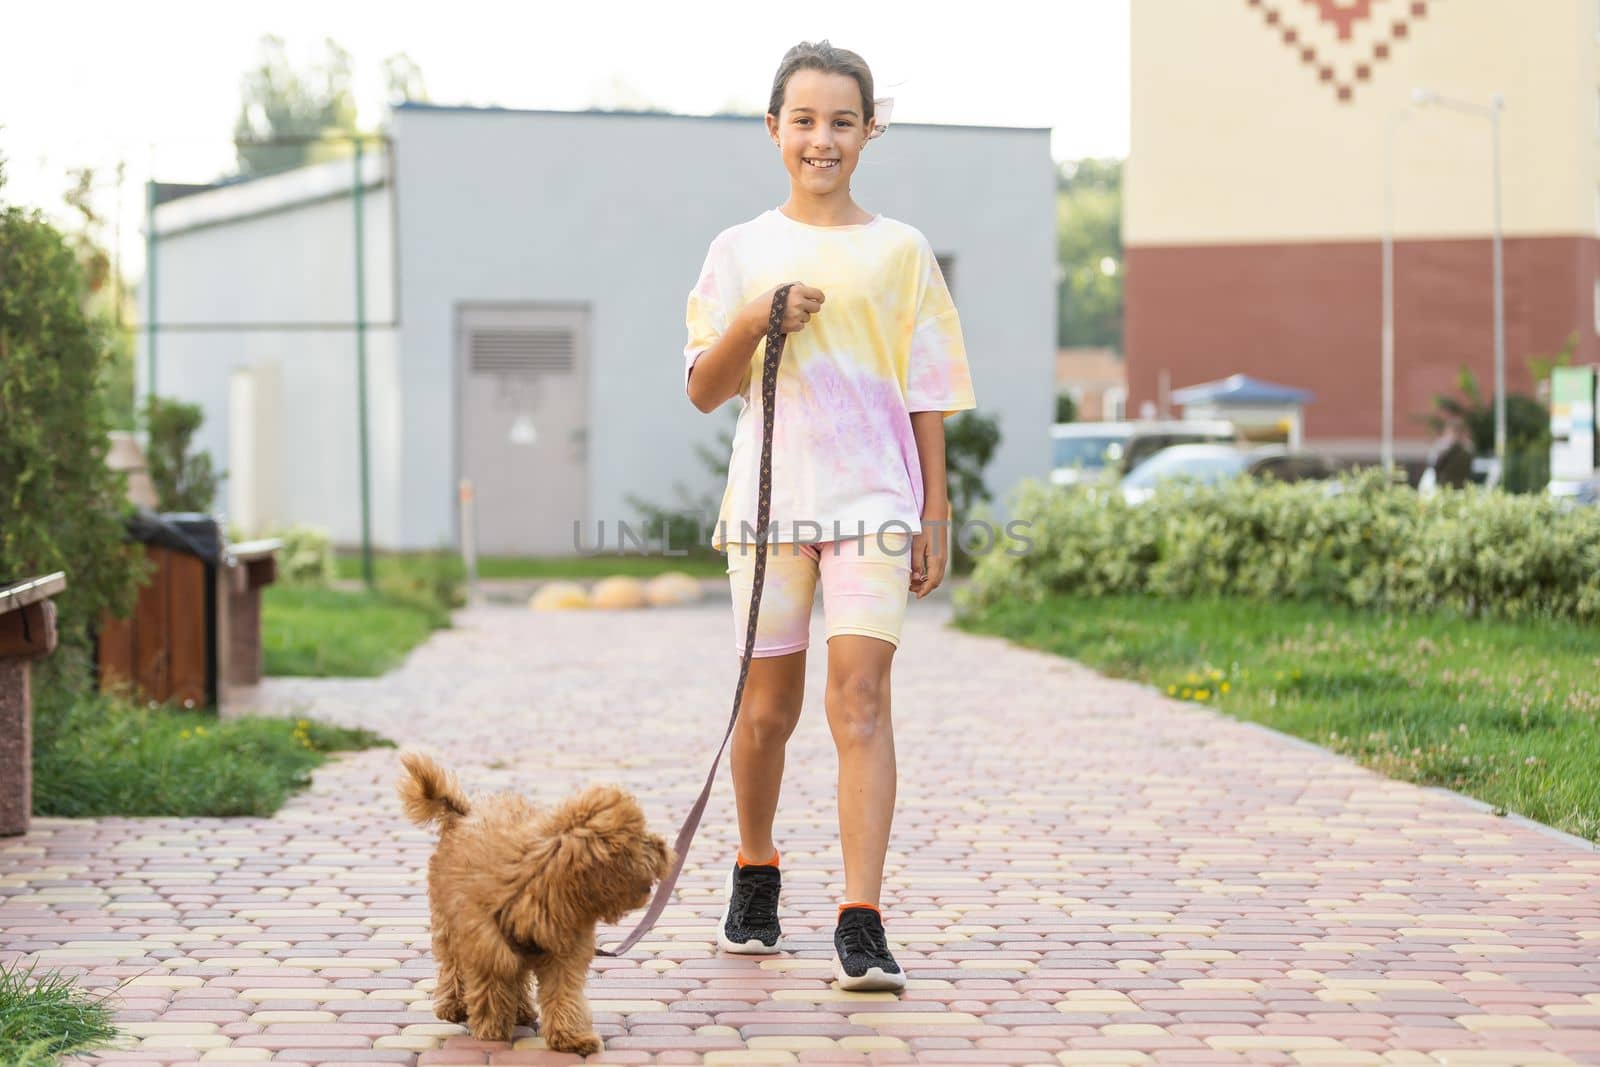 Little girl with a maltese puppy, outdoor summer